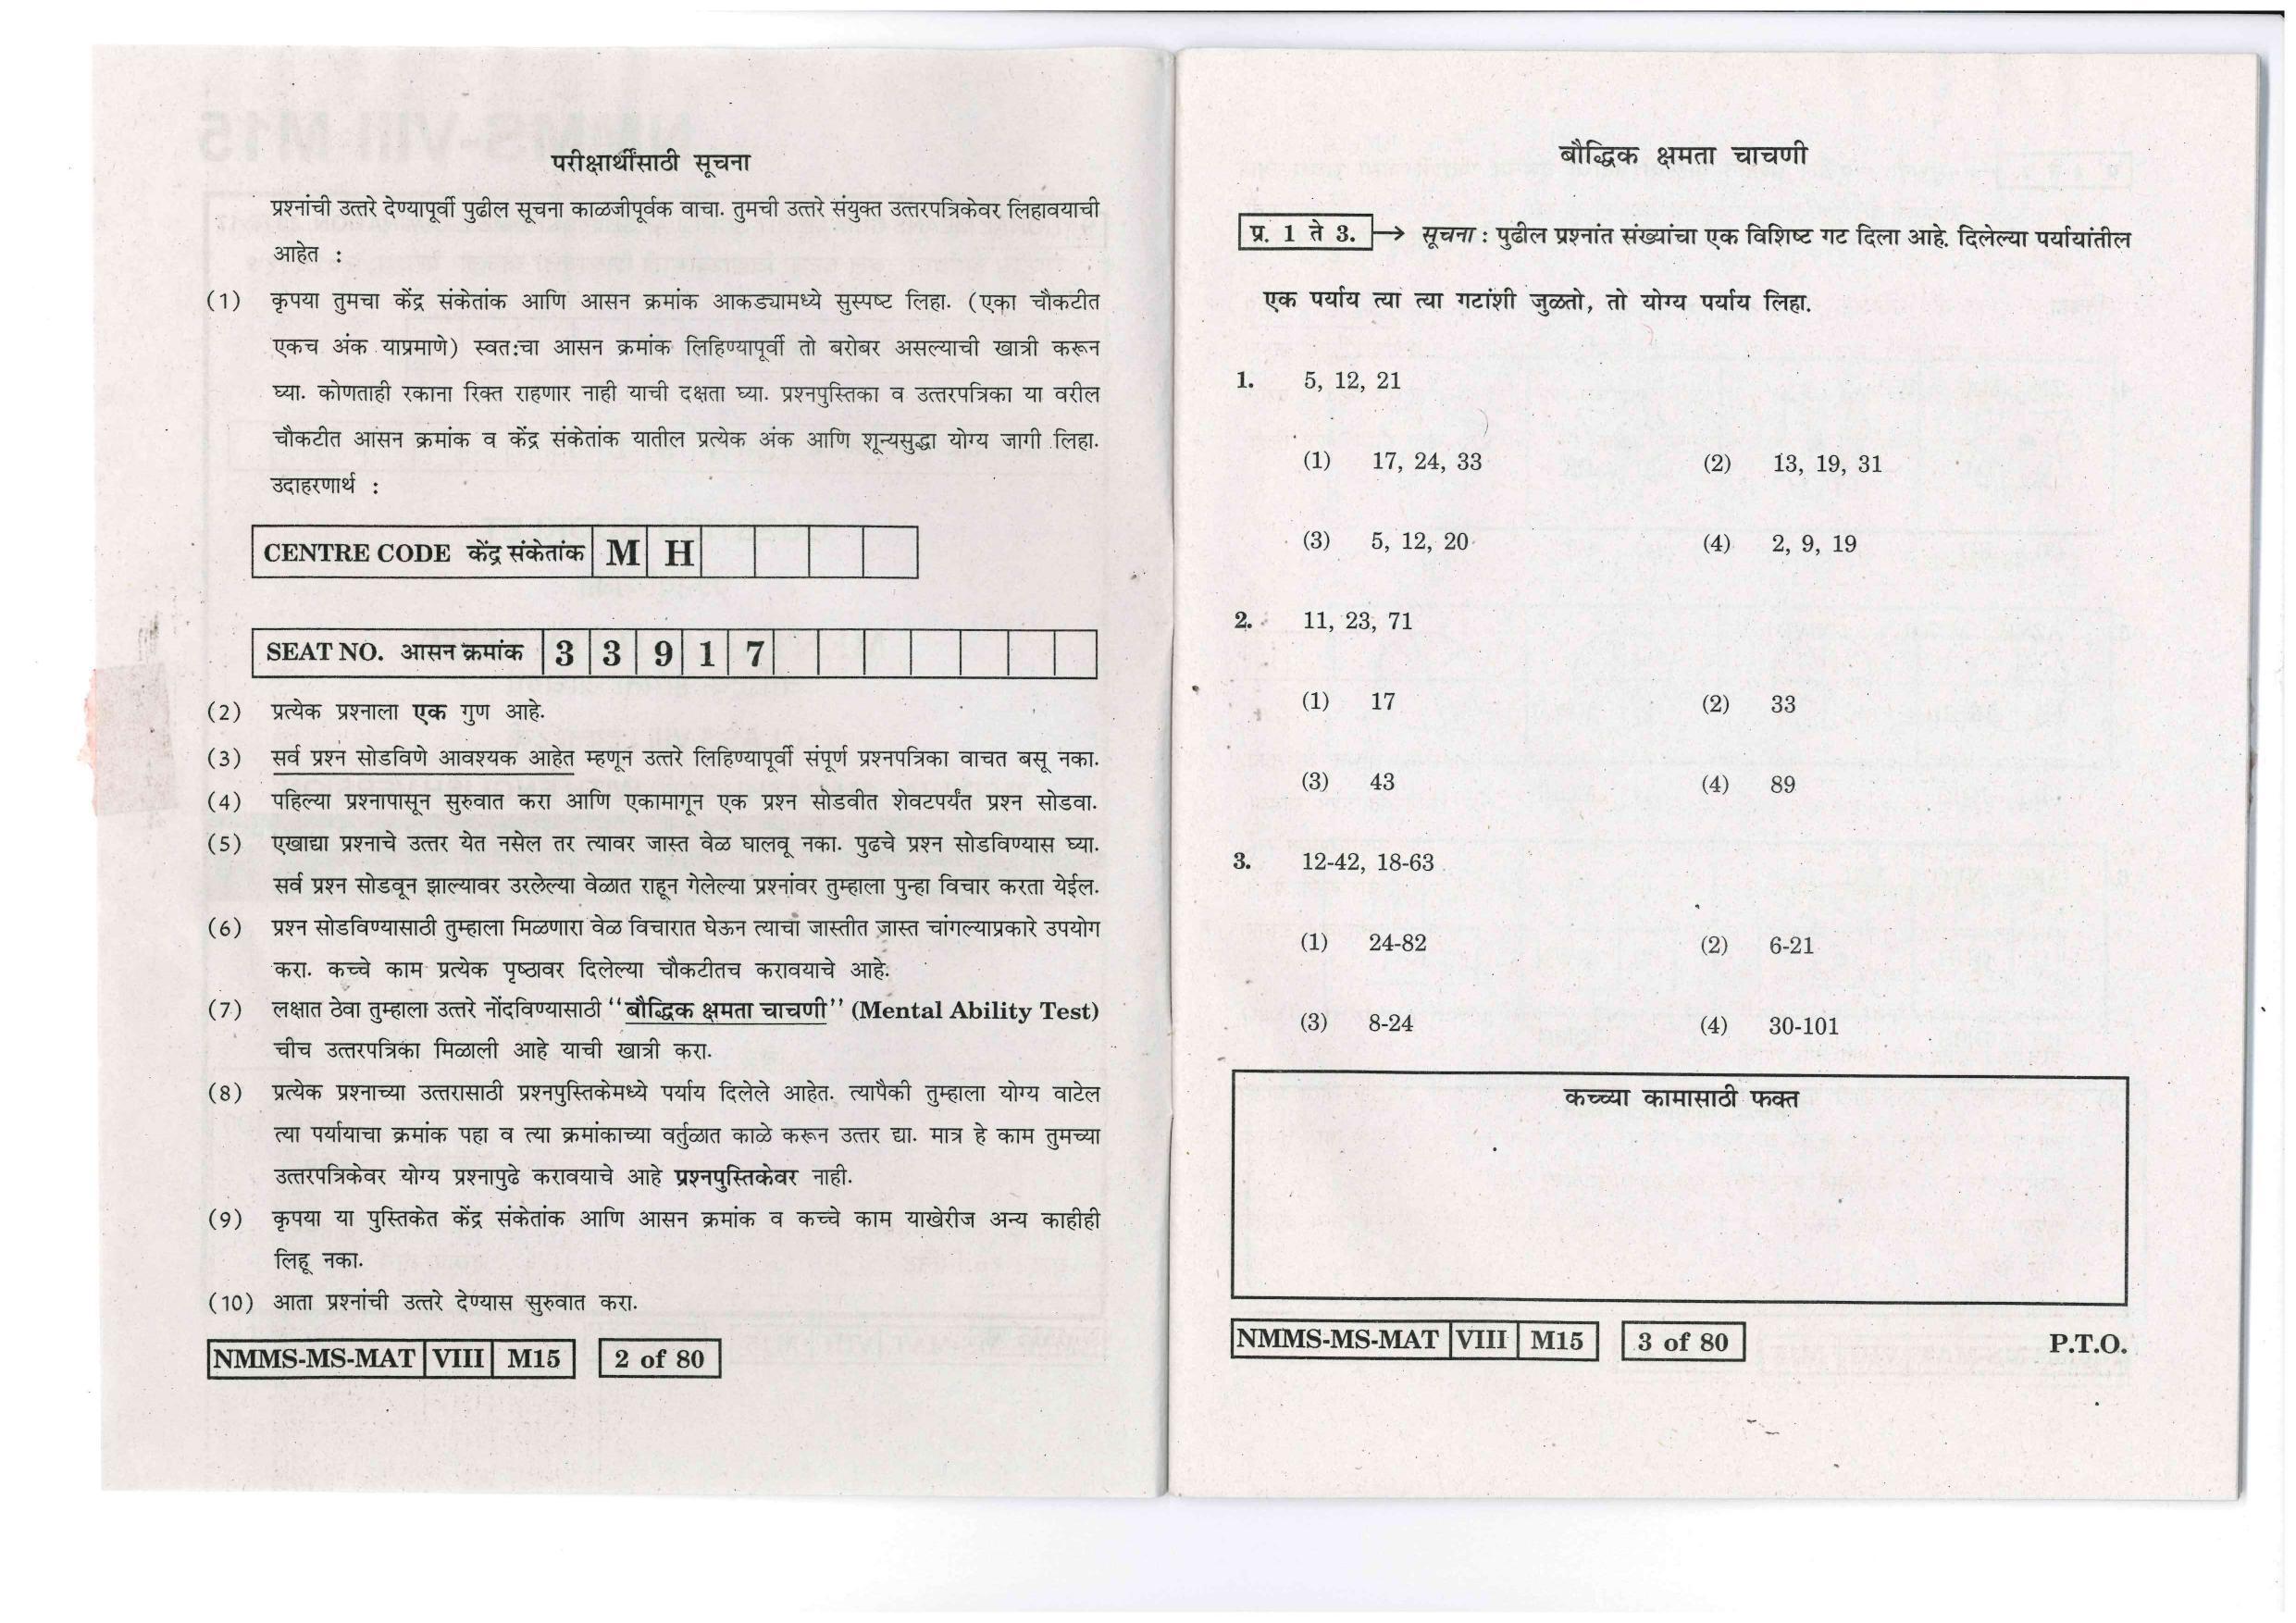 MAT MARATHI WITH ENGLISH VERSION 2016-17 Class 8 Maharashtra NMMS Question Papers - Page 2